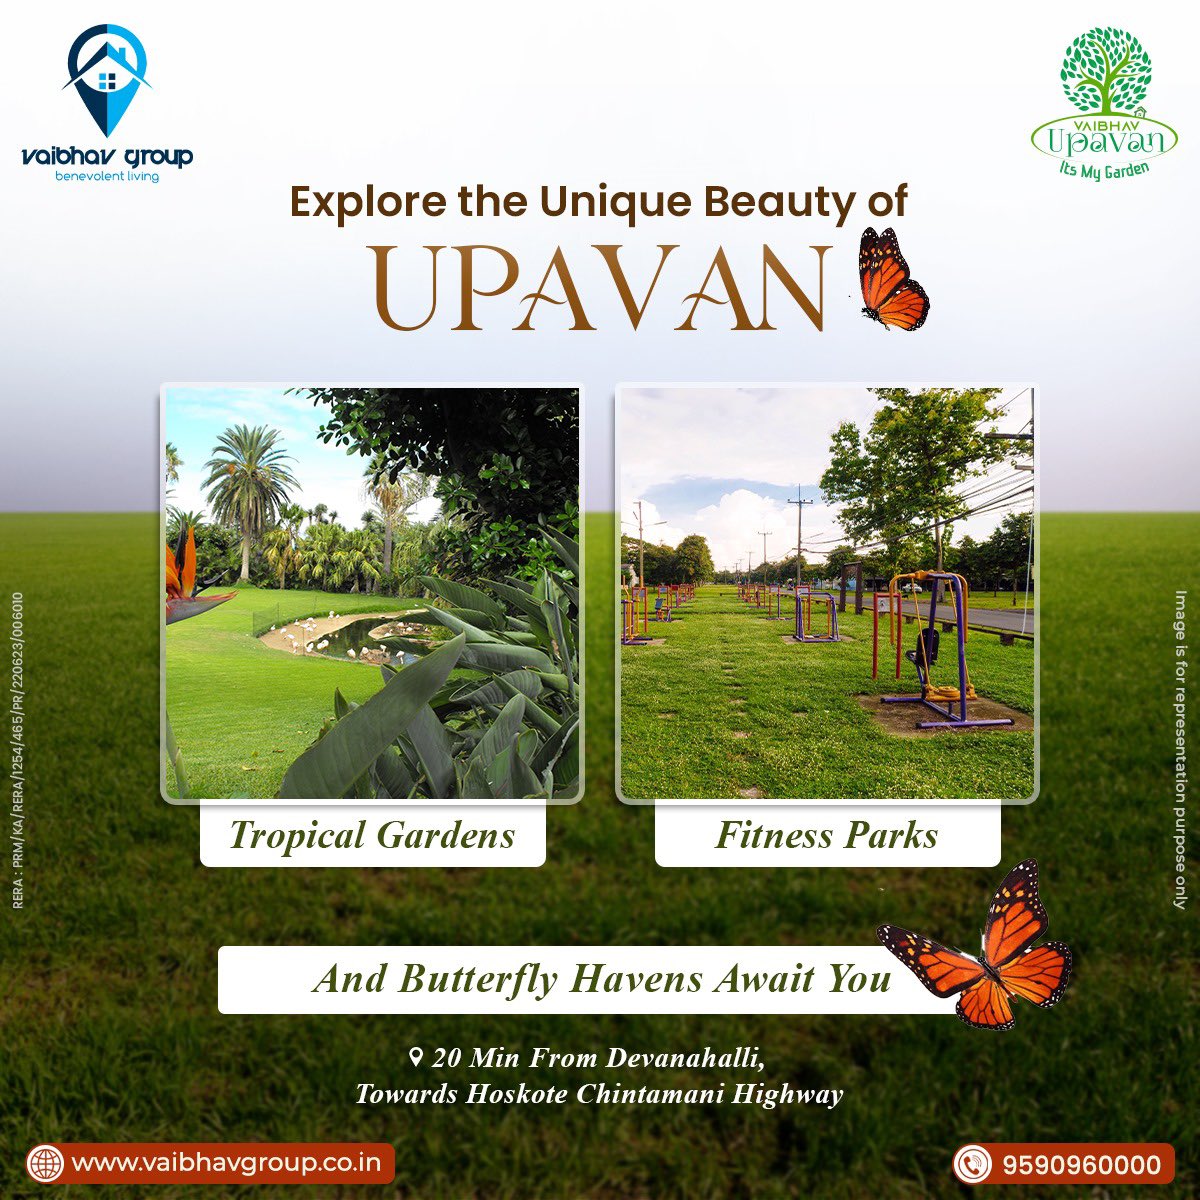 Explore the unique beauty of Upavan - Build your legacy on our coveted residential plots. Premium villa plots starting at ₹19.80 Lakhs* in Jangamakote, Bangalore, offered by Vaibhav Upavan from Vaibhav Group.”
#VaibhavGroup #investforthefuture #investforkids #investinplots
#Plot